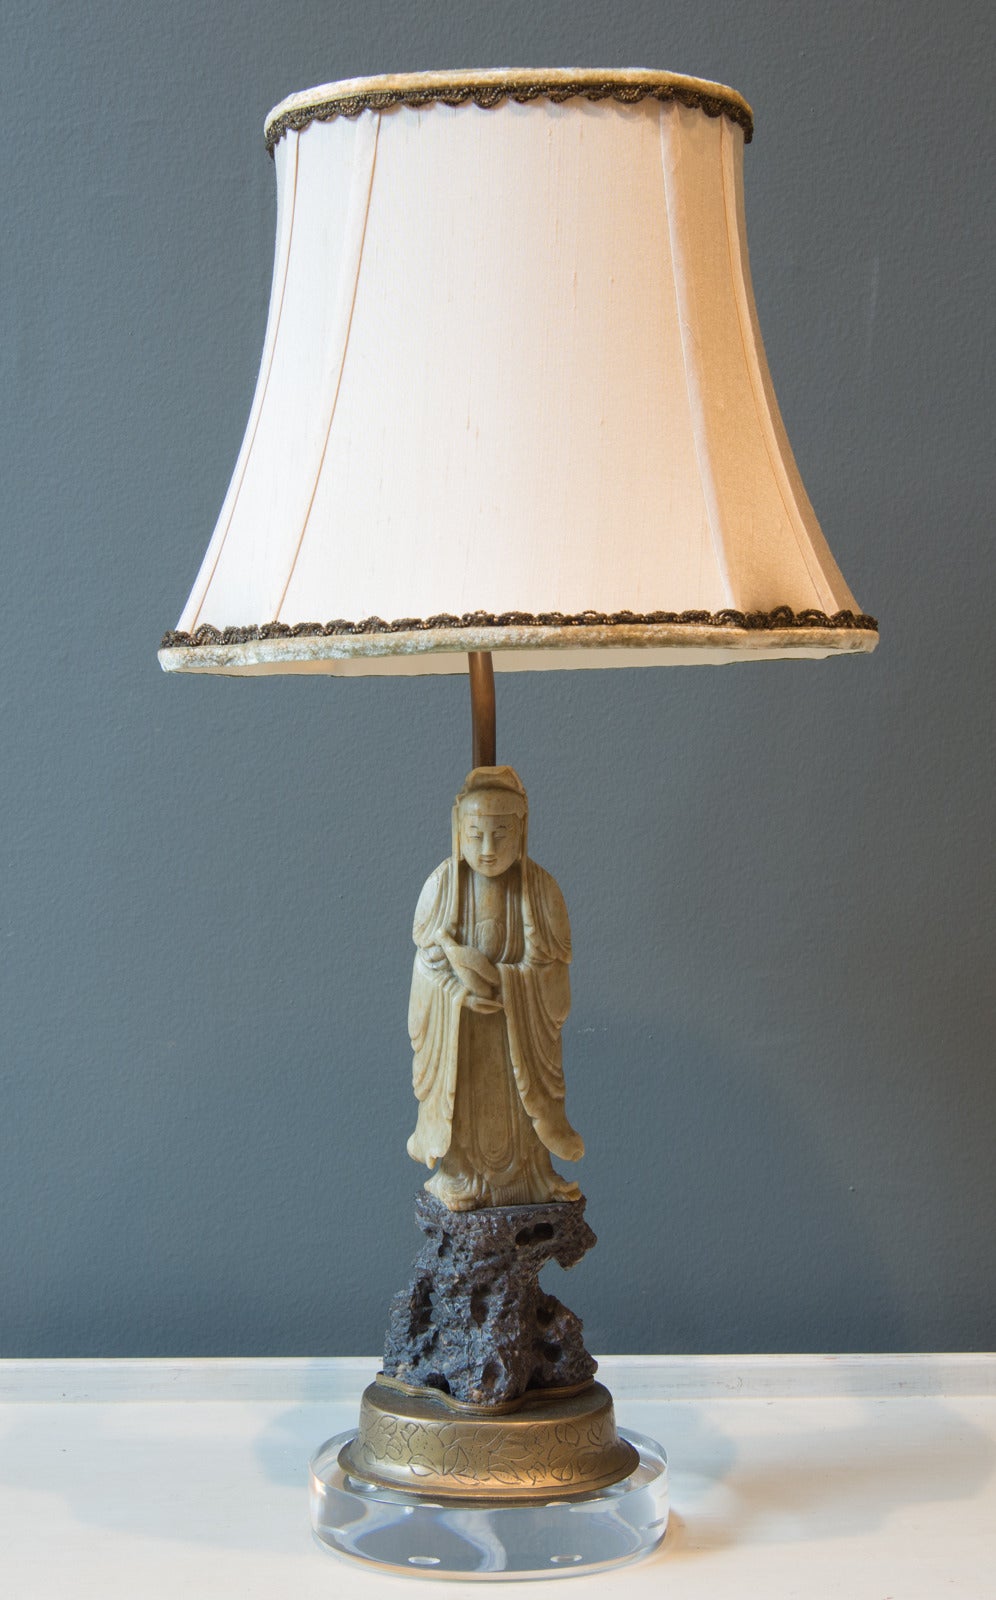 This lamp features a Chinese green hard stone female standing figure on the original bronze and brass base mounted to a new Lucite base. Also included is a custom ecru silk shade with pale green trim.